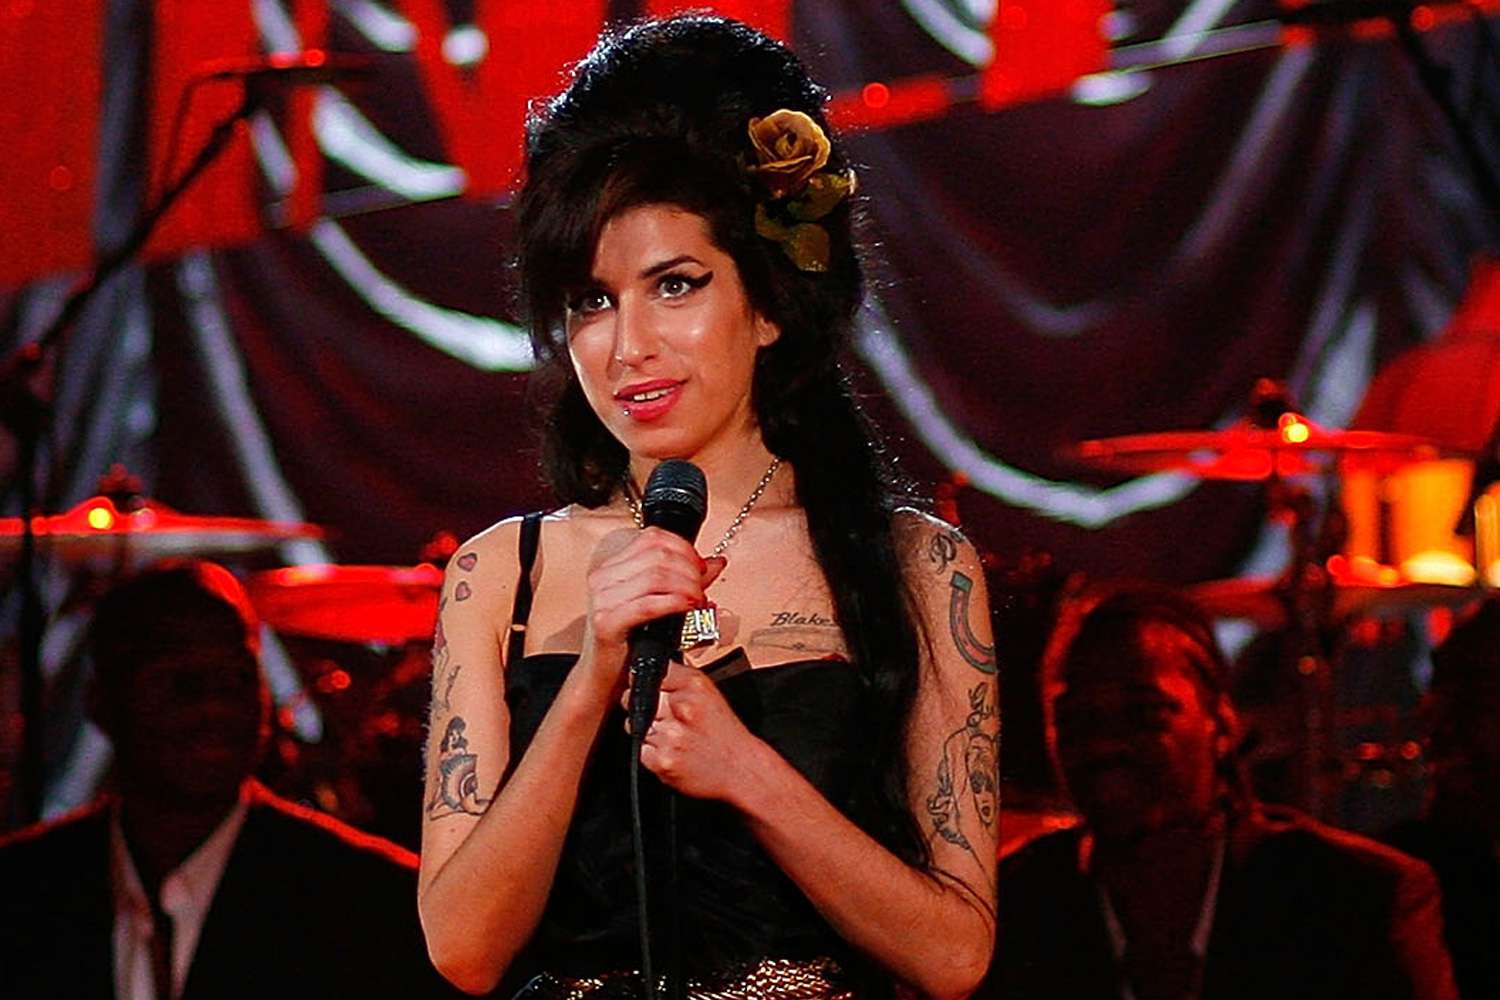 Amy Winehouse’s Viral Hot-Mic Moment from 2008 Grammys About Justin Timberlake Cut from 'Back to Black'